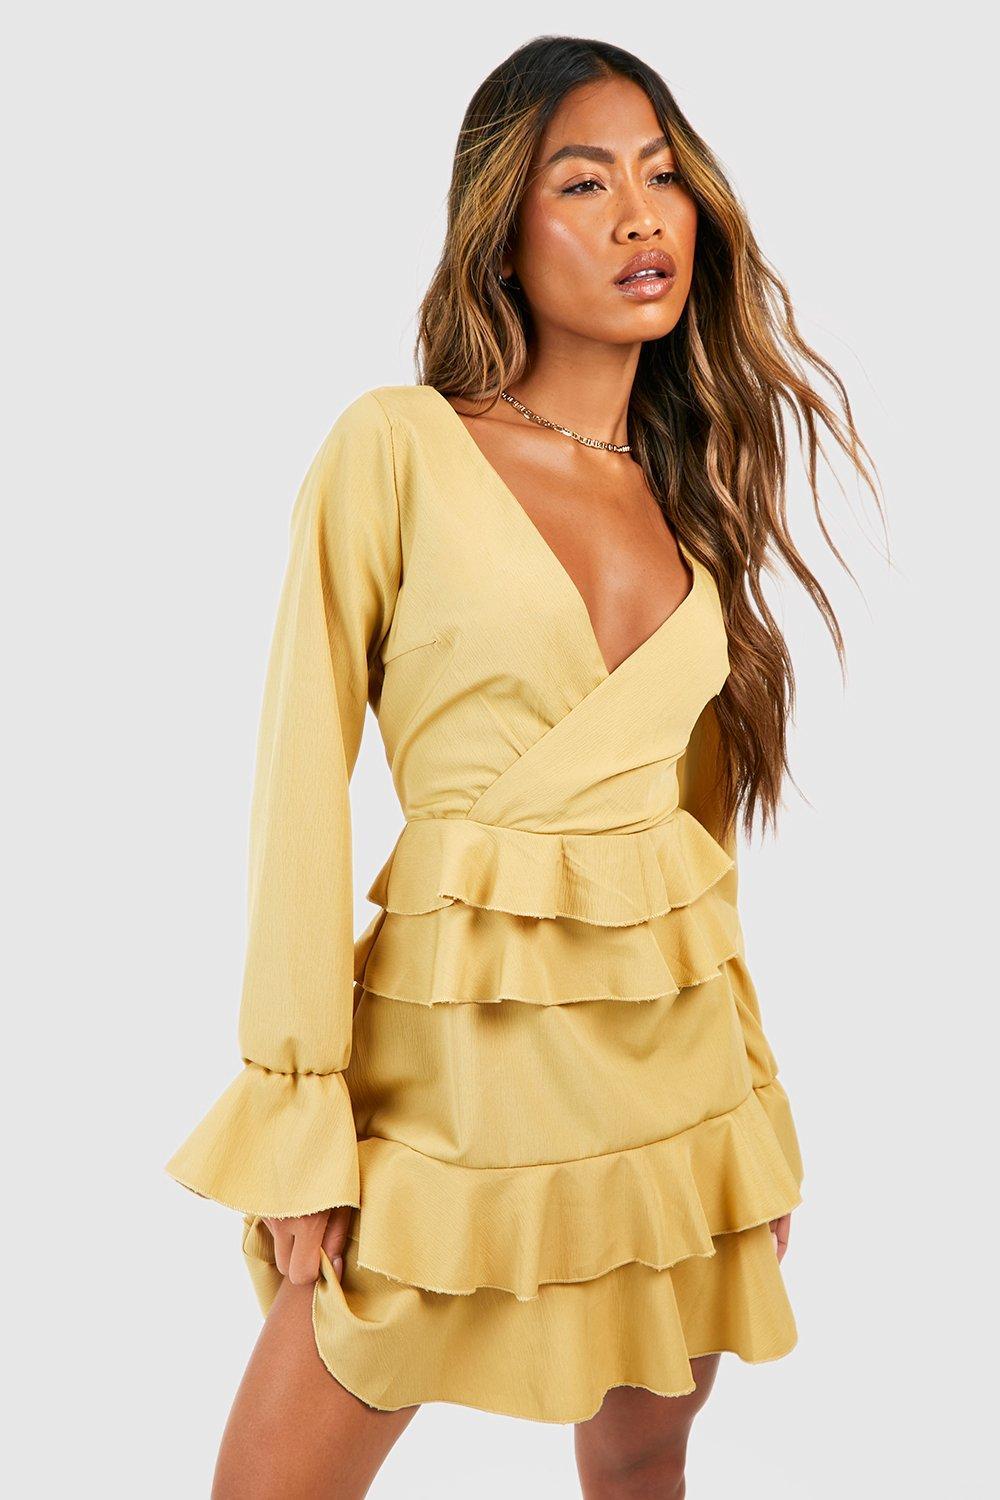 Boohoo Textured Frill Skater Dress in Yellow | Lyst